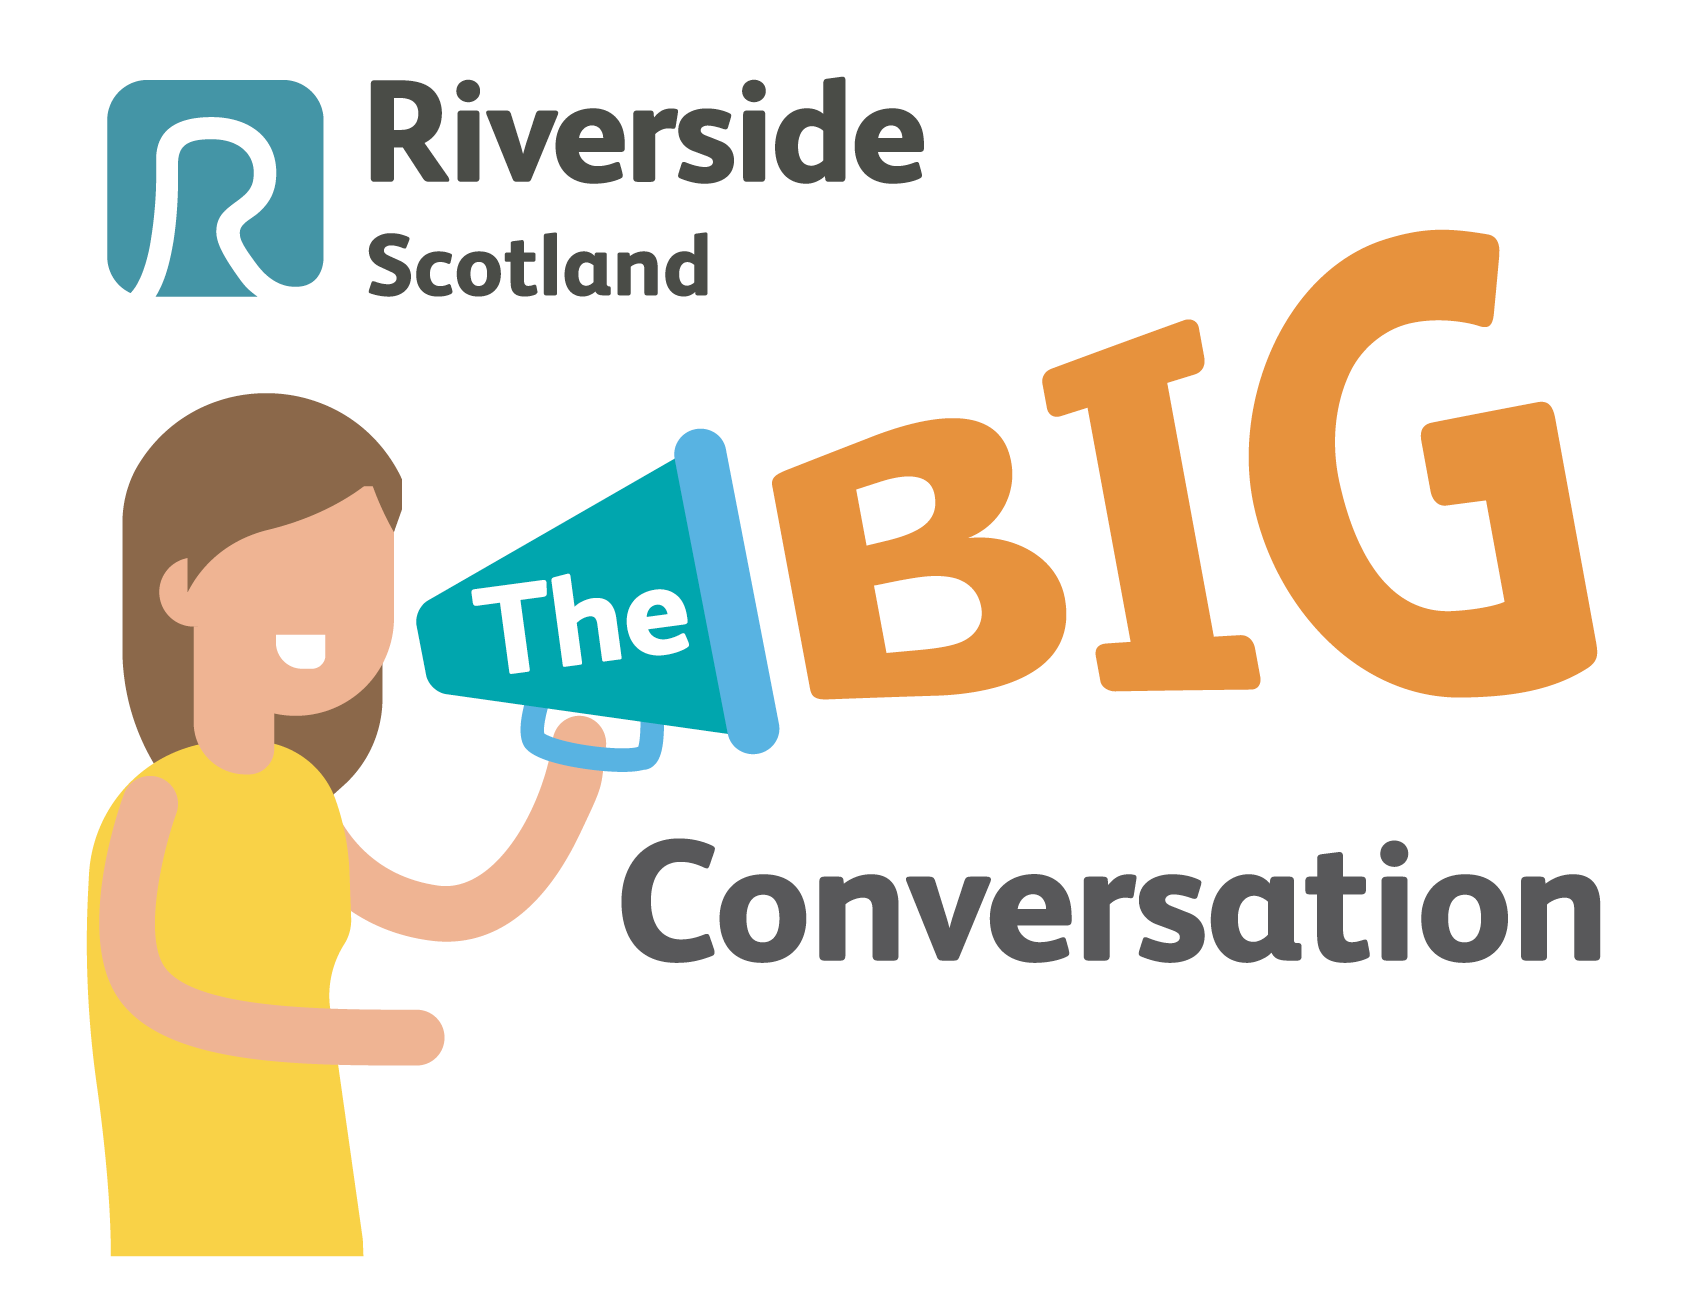 Riverside Scotland launches Big Conversation with residents